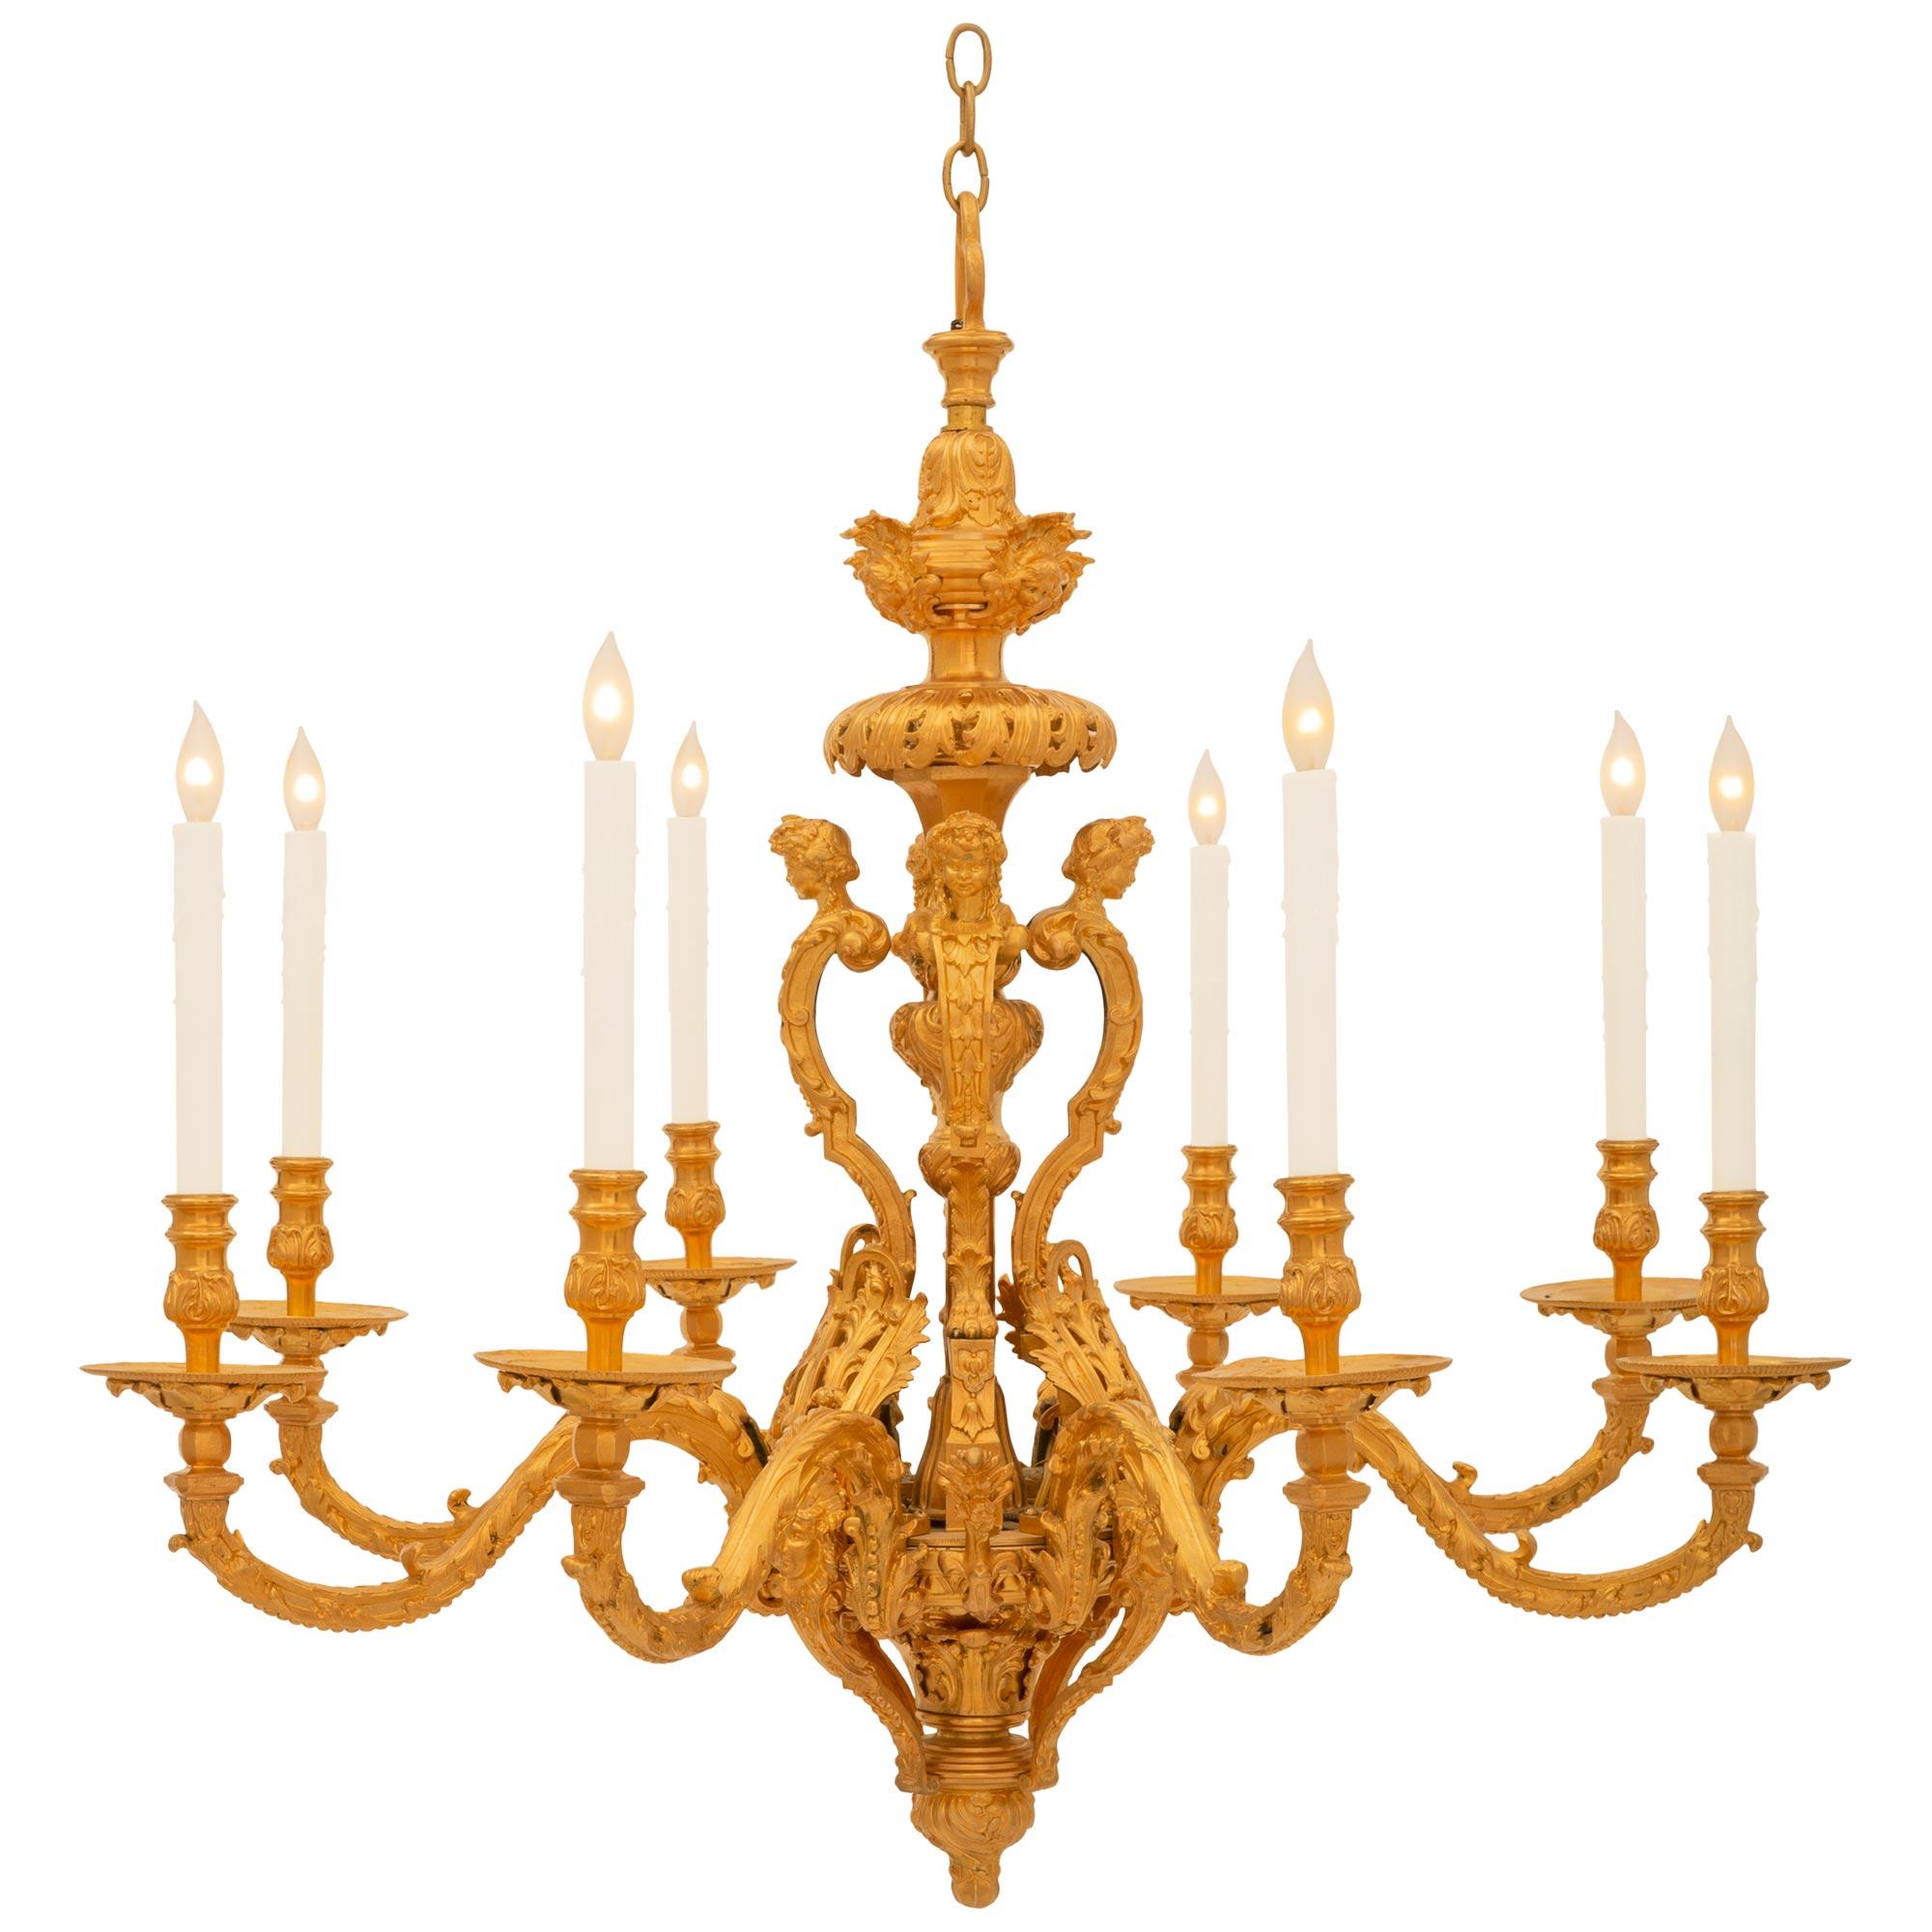 French 19th Century Louis XIV St. Ormolu Chandelier In Good Condition For Sale In West Palm Beach, FL